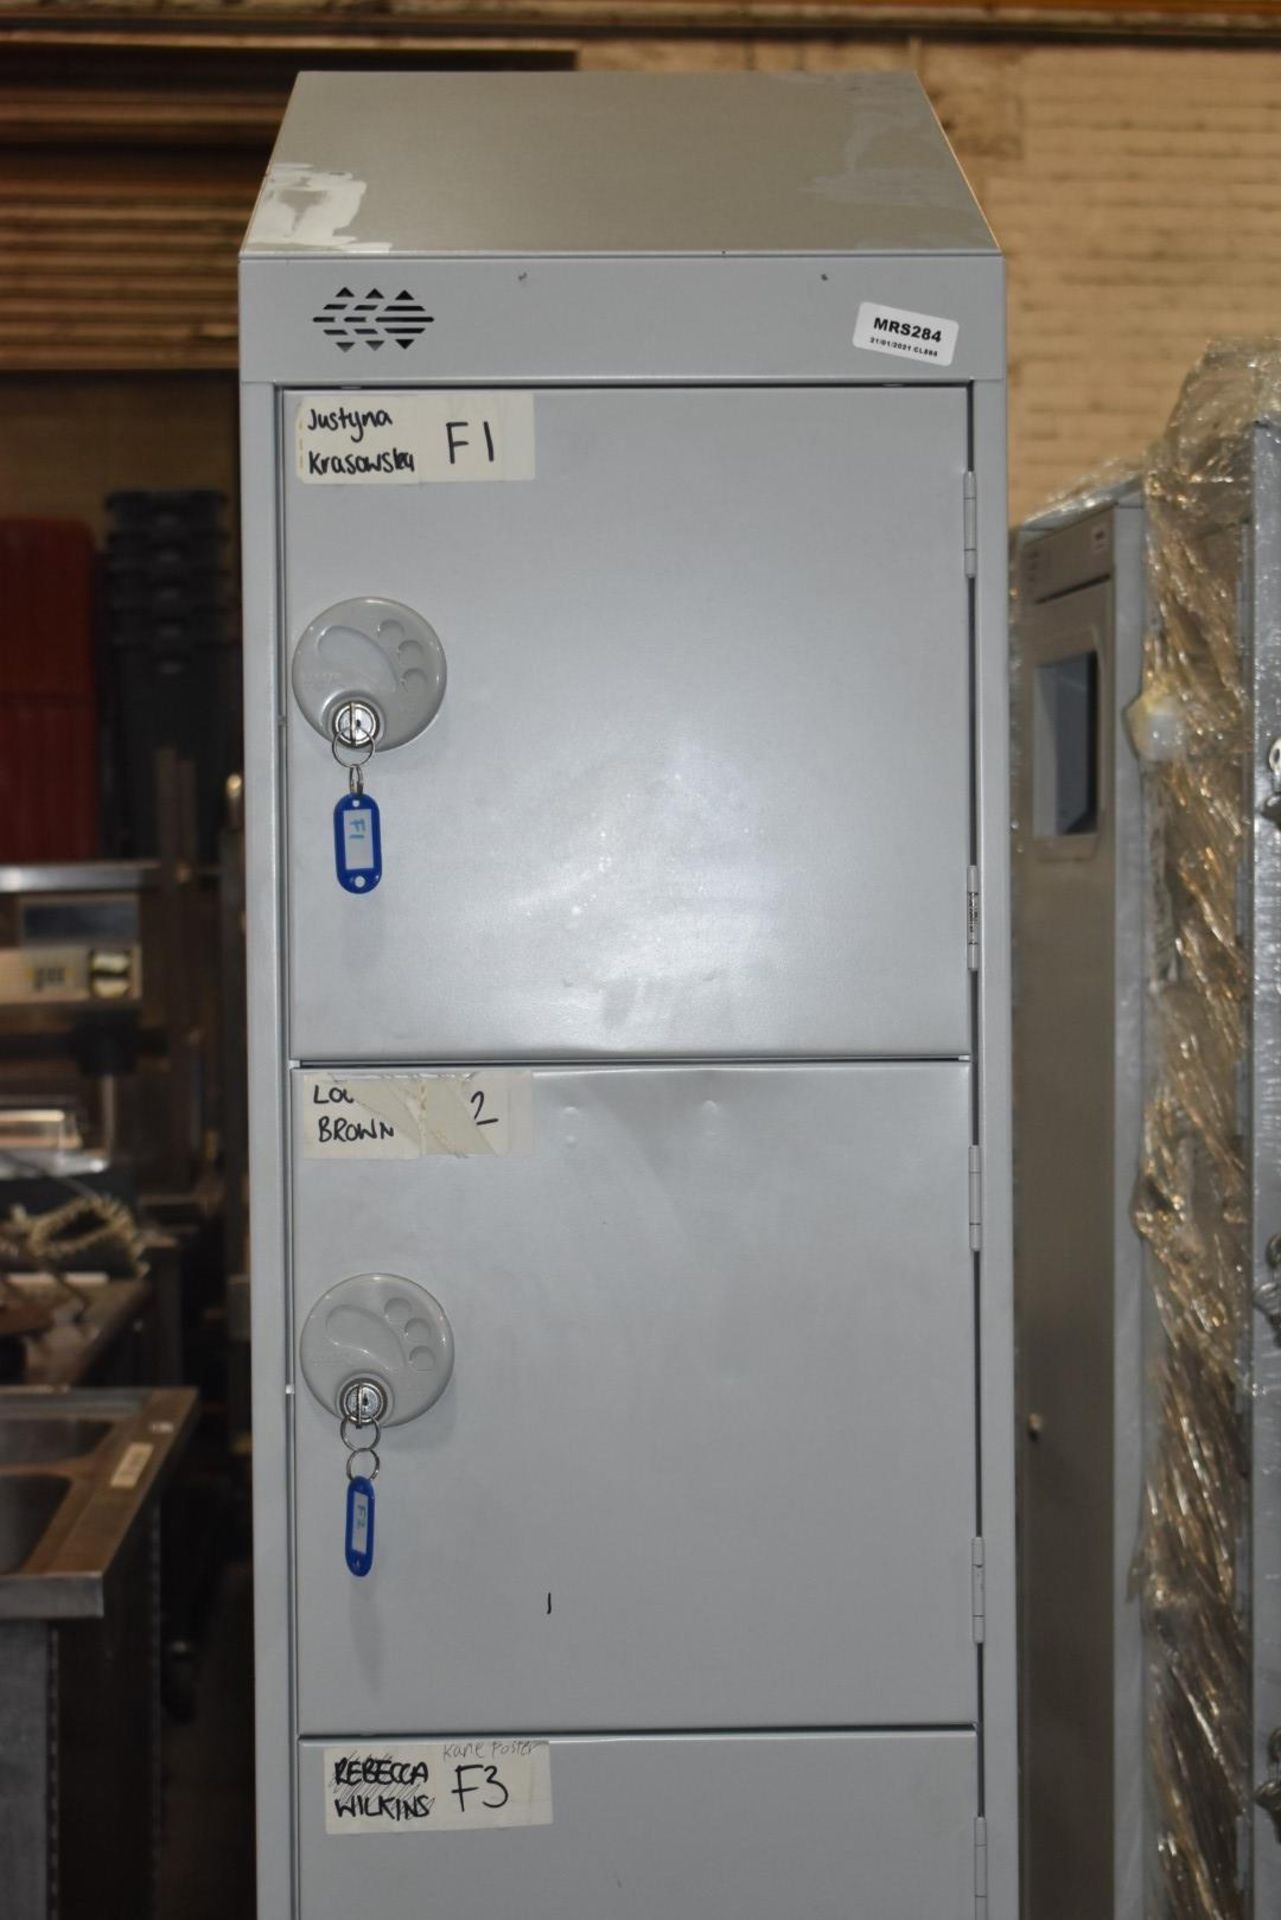 1 x Link Biocote 5 Door Staff Locker in Grey With Keys and Anti Clutter Slope Top - Very Good Pre- - Image 3 of 5